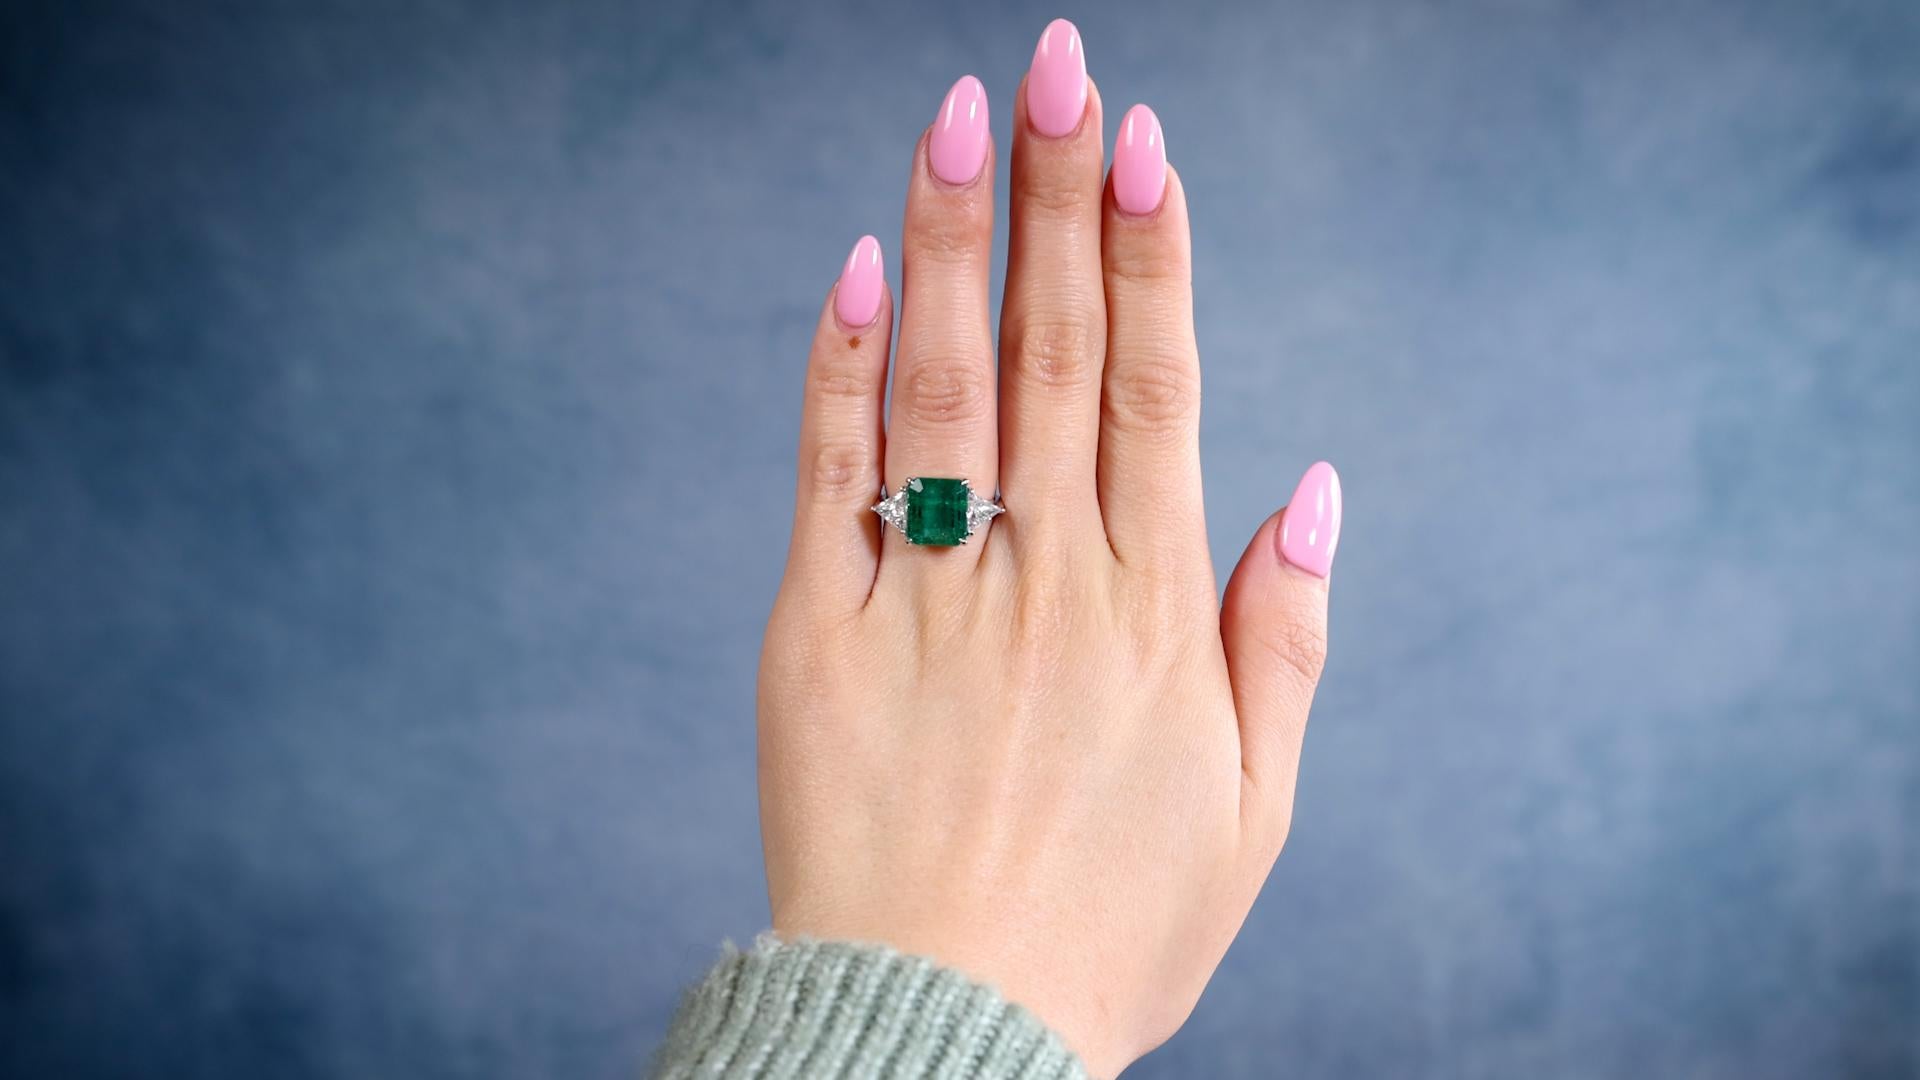 One Estate Italian IGN 4.40 Carat Emerald Diamond 18k White Gold Ring. Featuring one emerald of 4.40 carats, accompanied by IGN certificate #34135. Accented by two trillion cut diamonds with a total weight of approximately 1.00 carat, graded